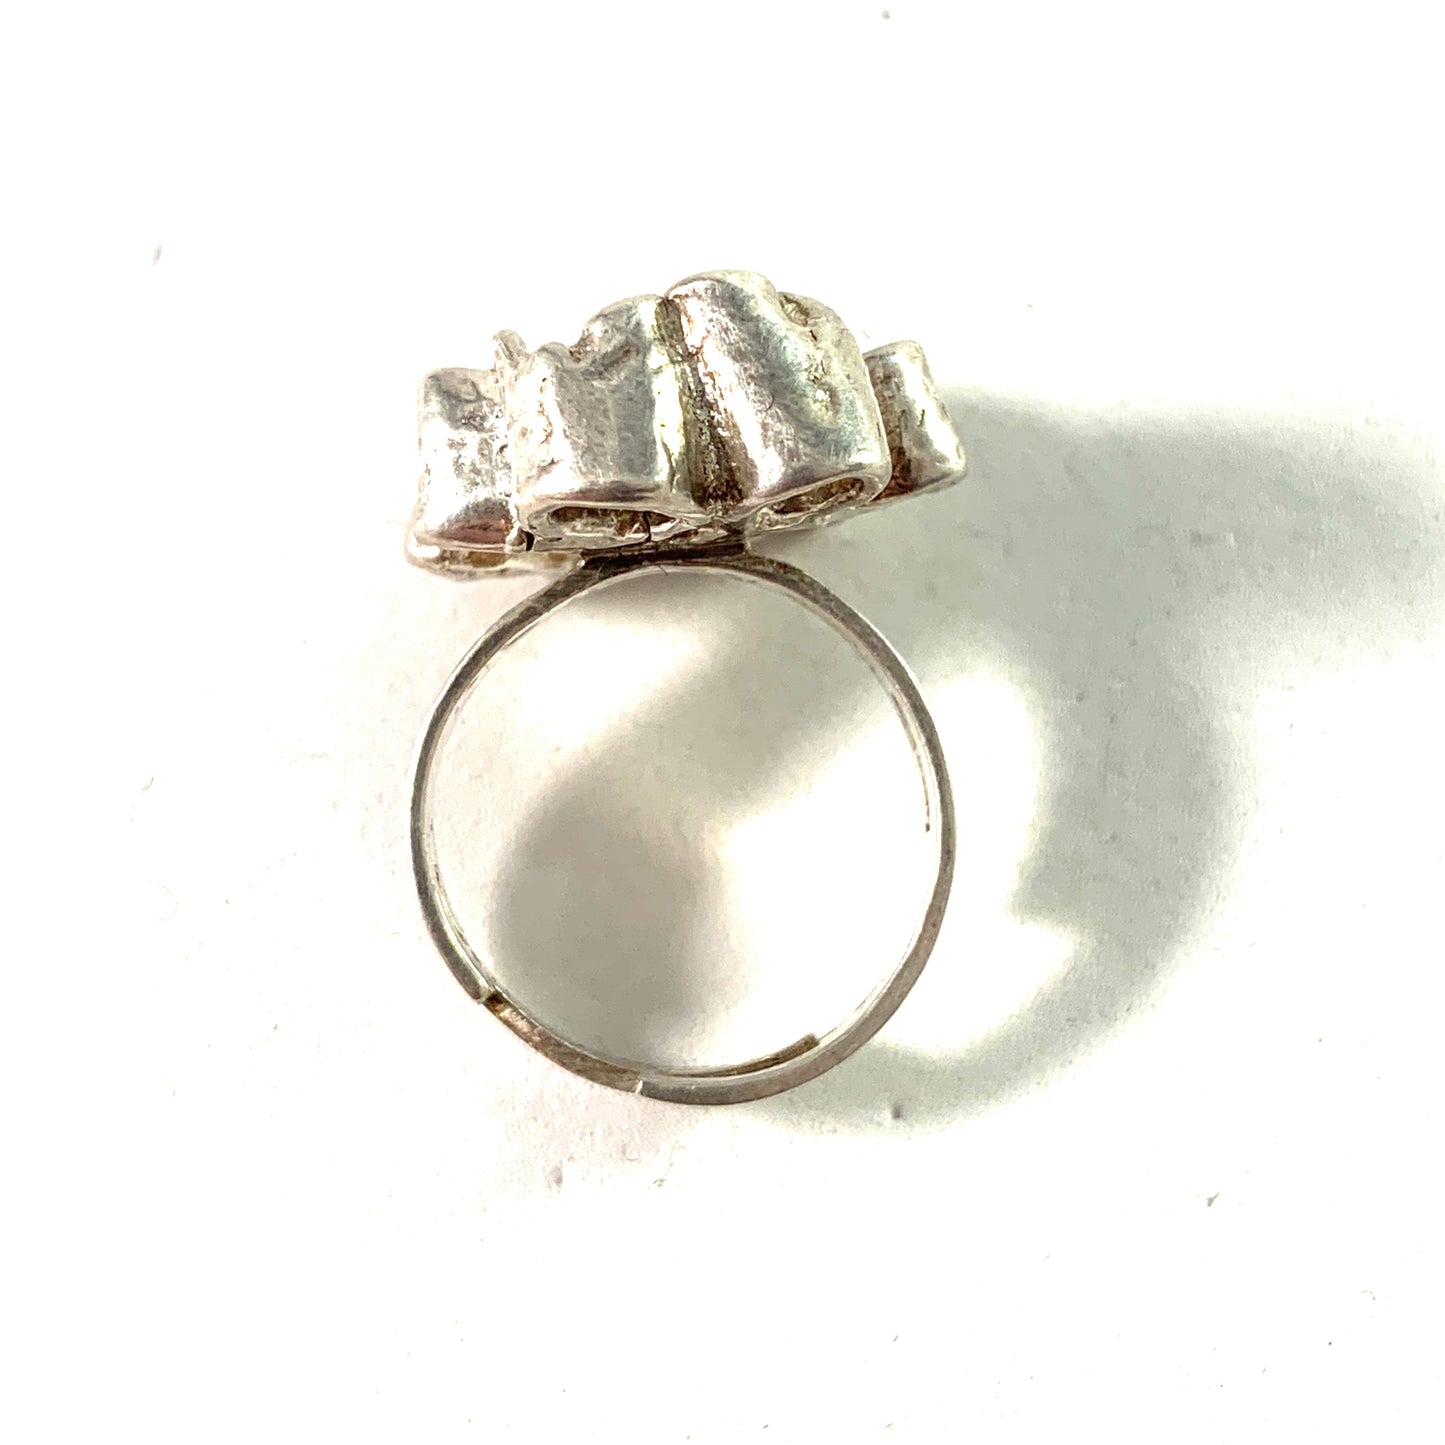 Stockholm year 1970 Modernist Abstract Sterling Silver Ring. Signed